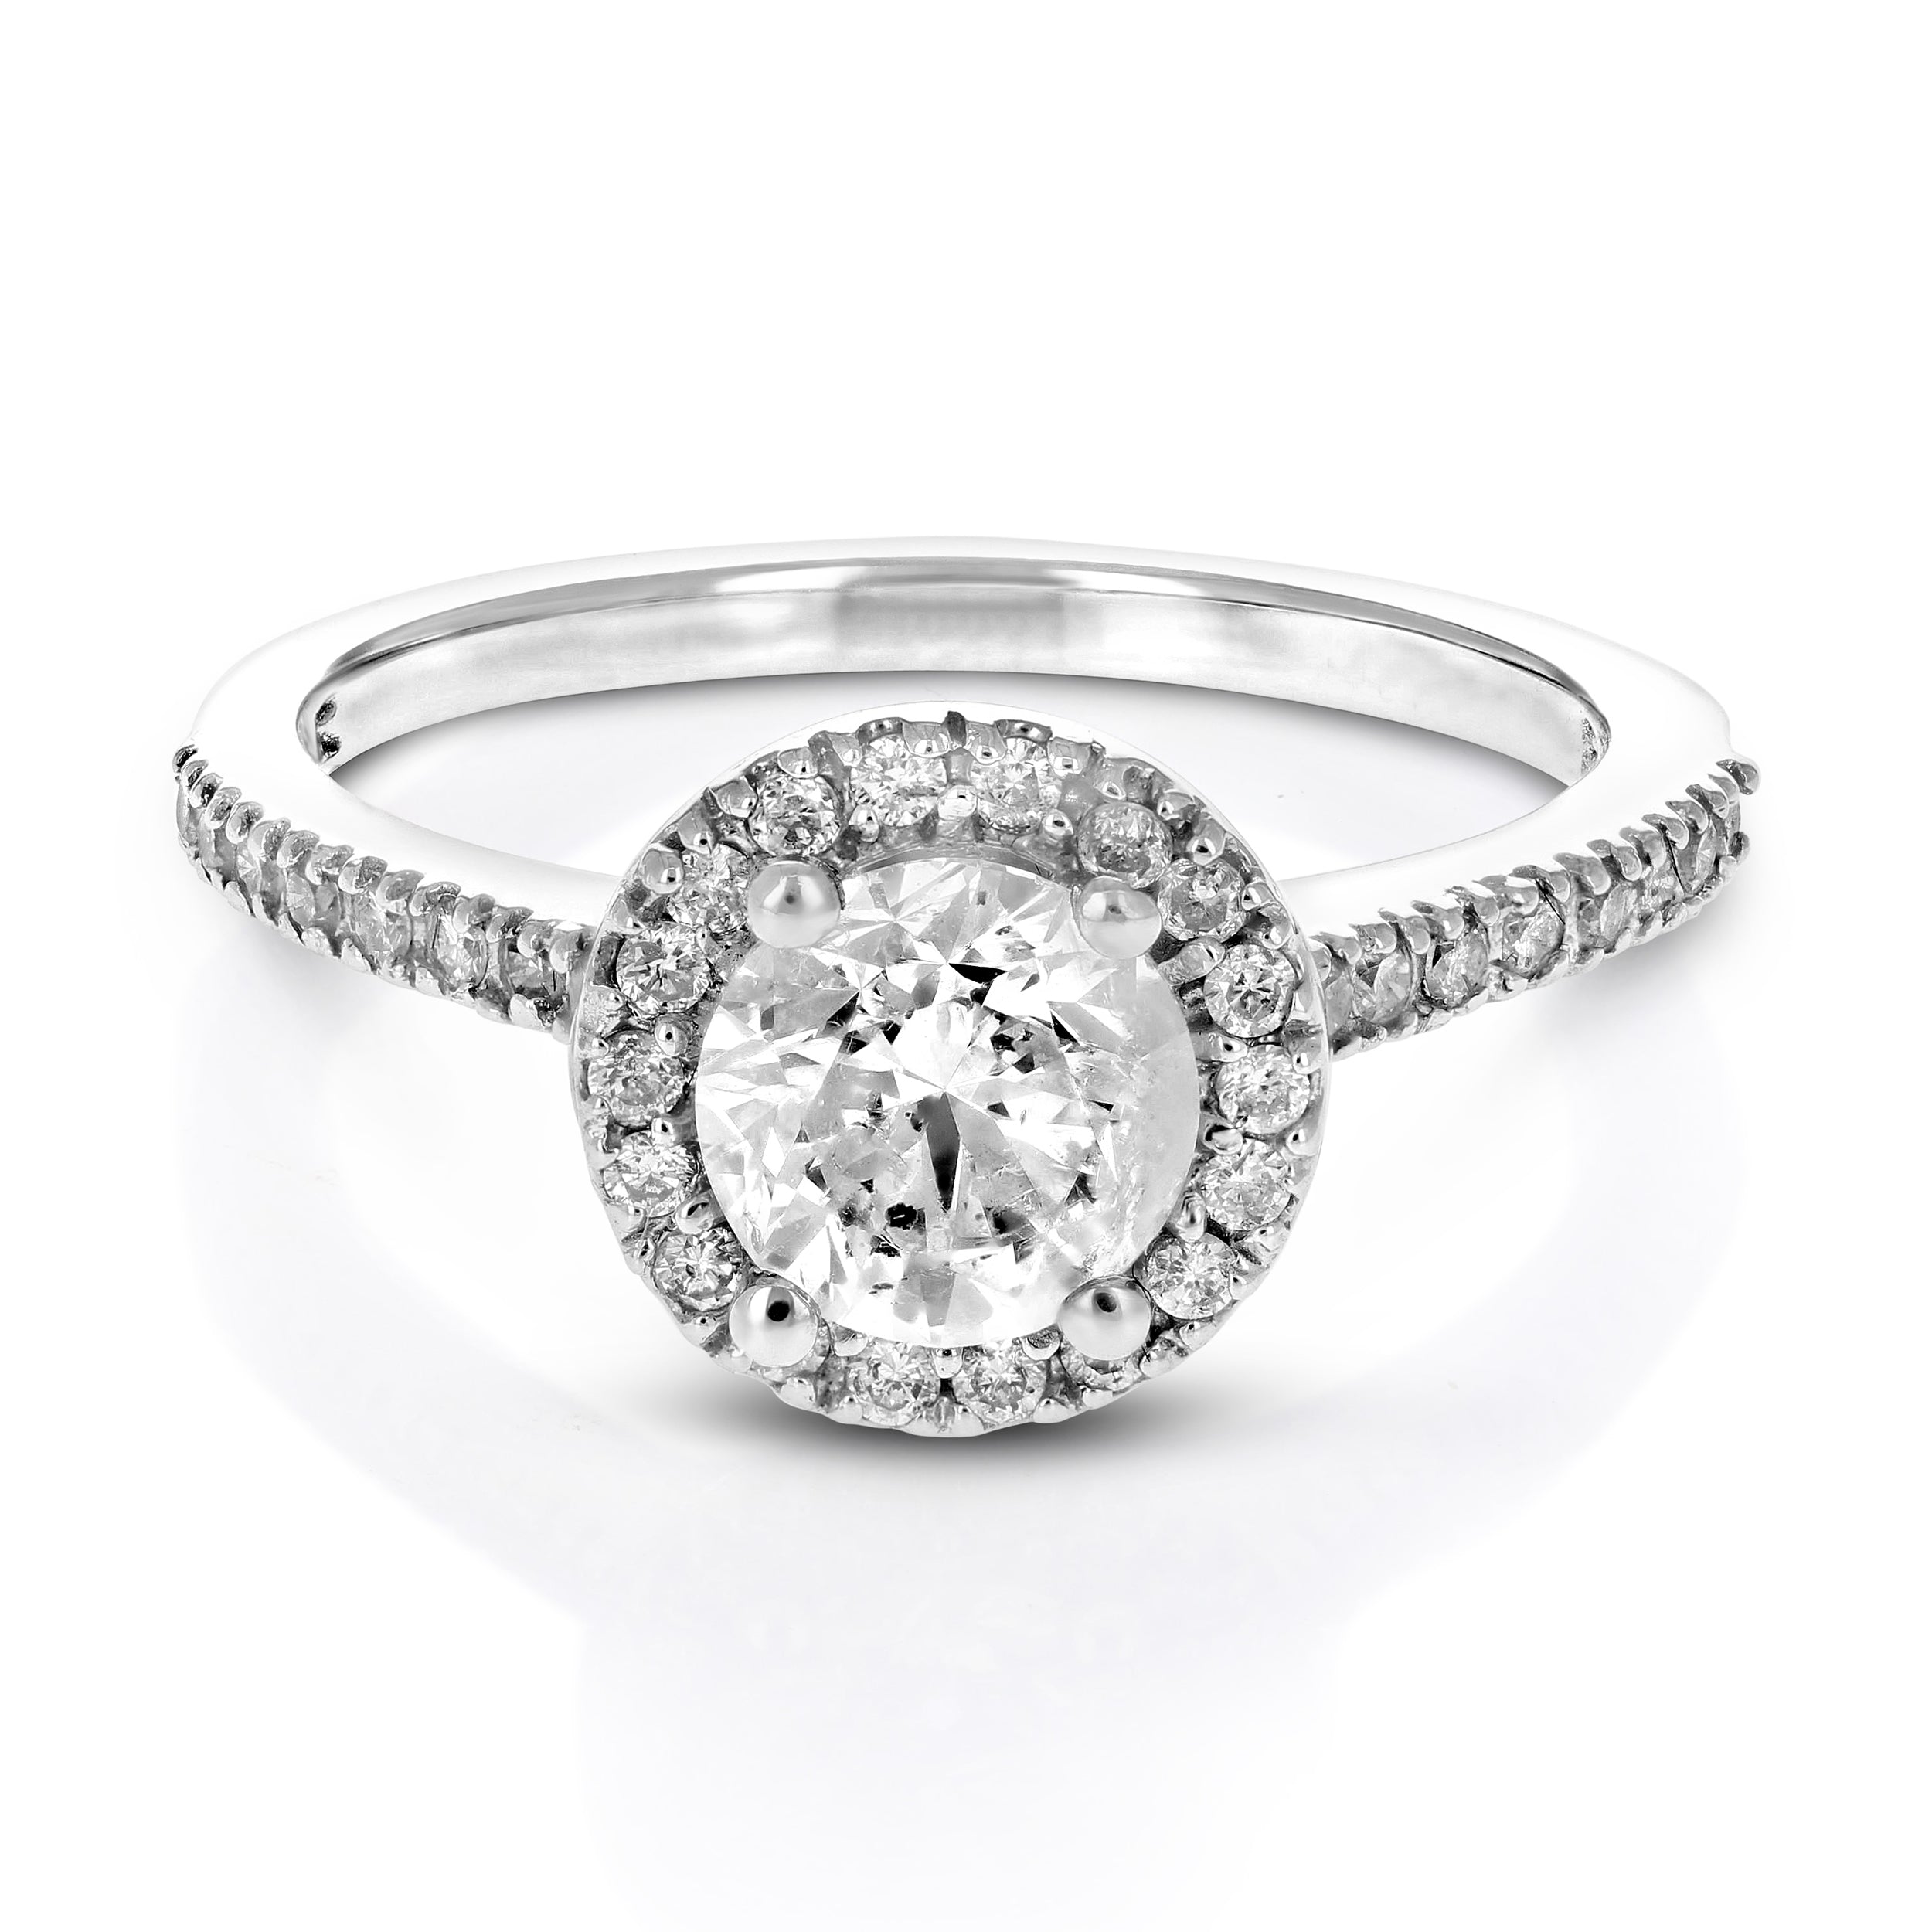 French Pave Diamond Engagement Ring